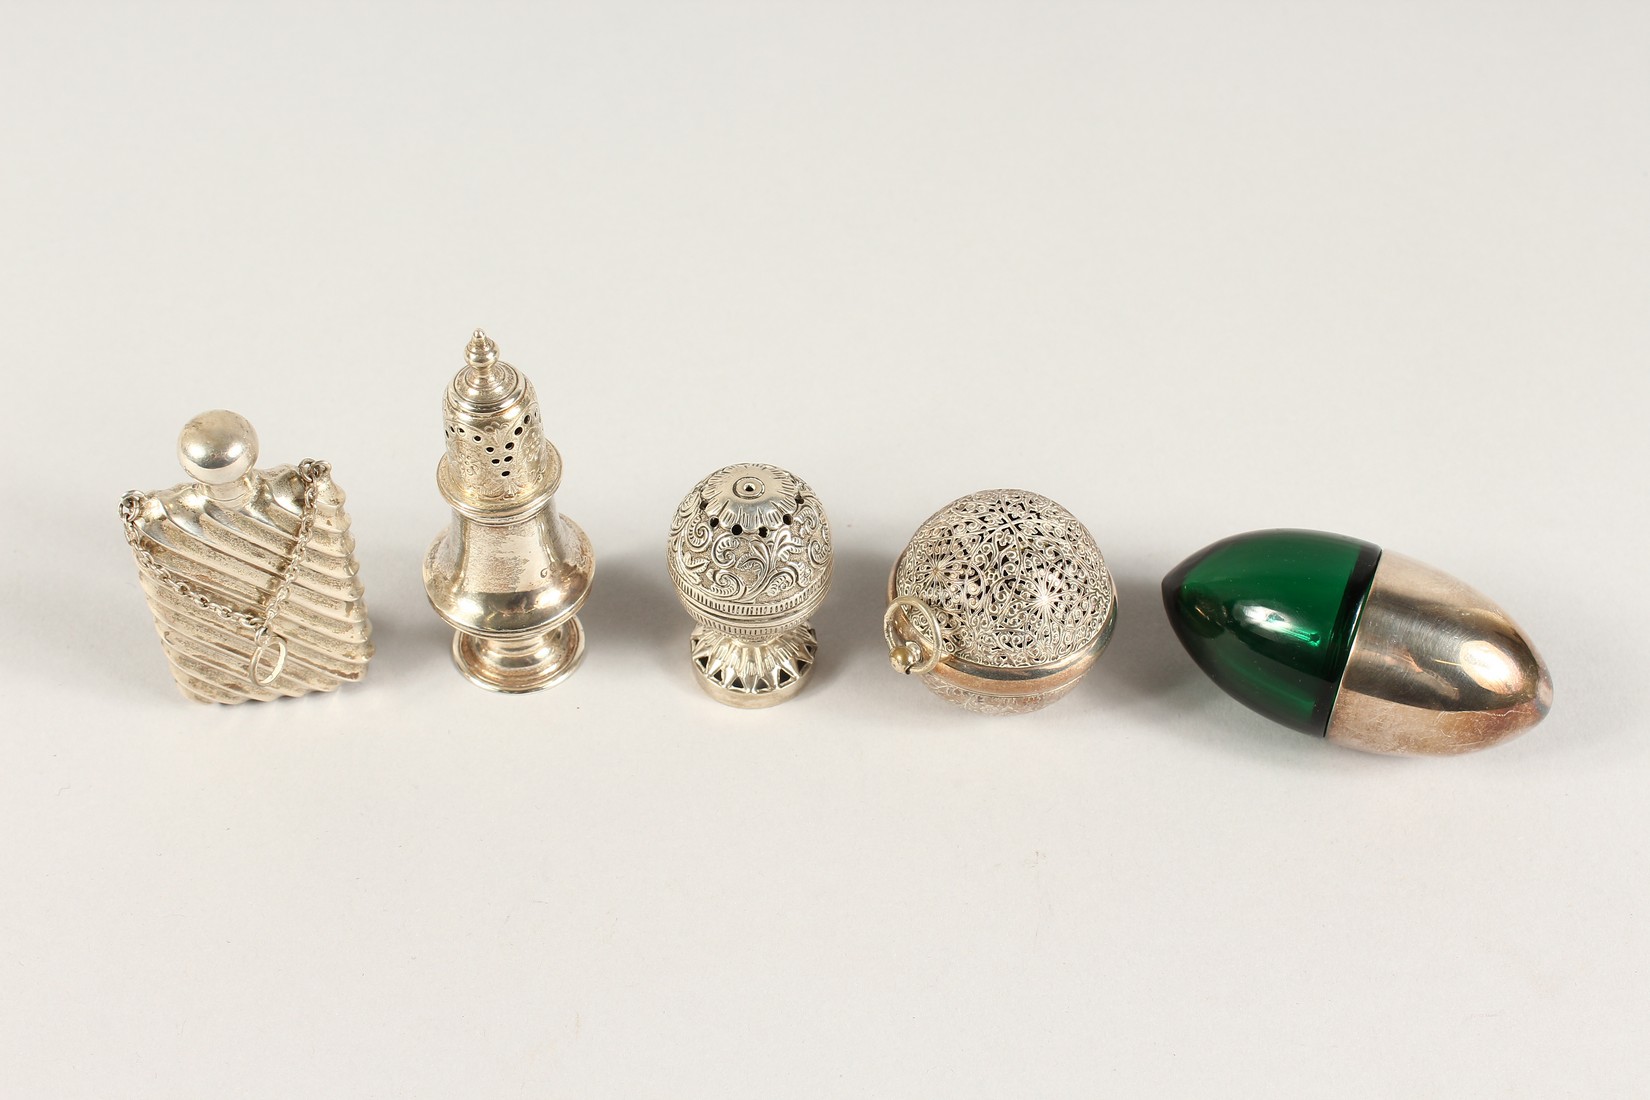 A MINIATURE SILVER PEPPERETTE, scent bottle and 3 other items (5). - Image 2 of 3